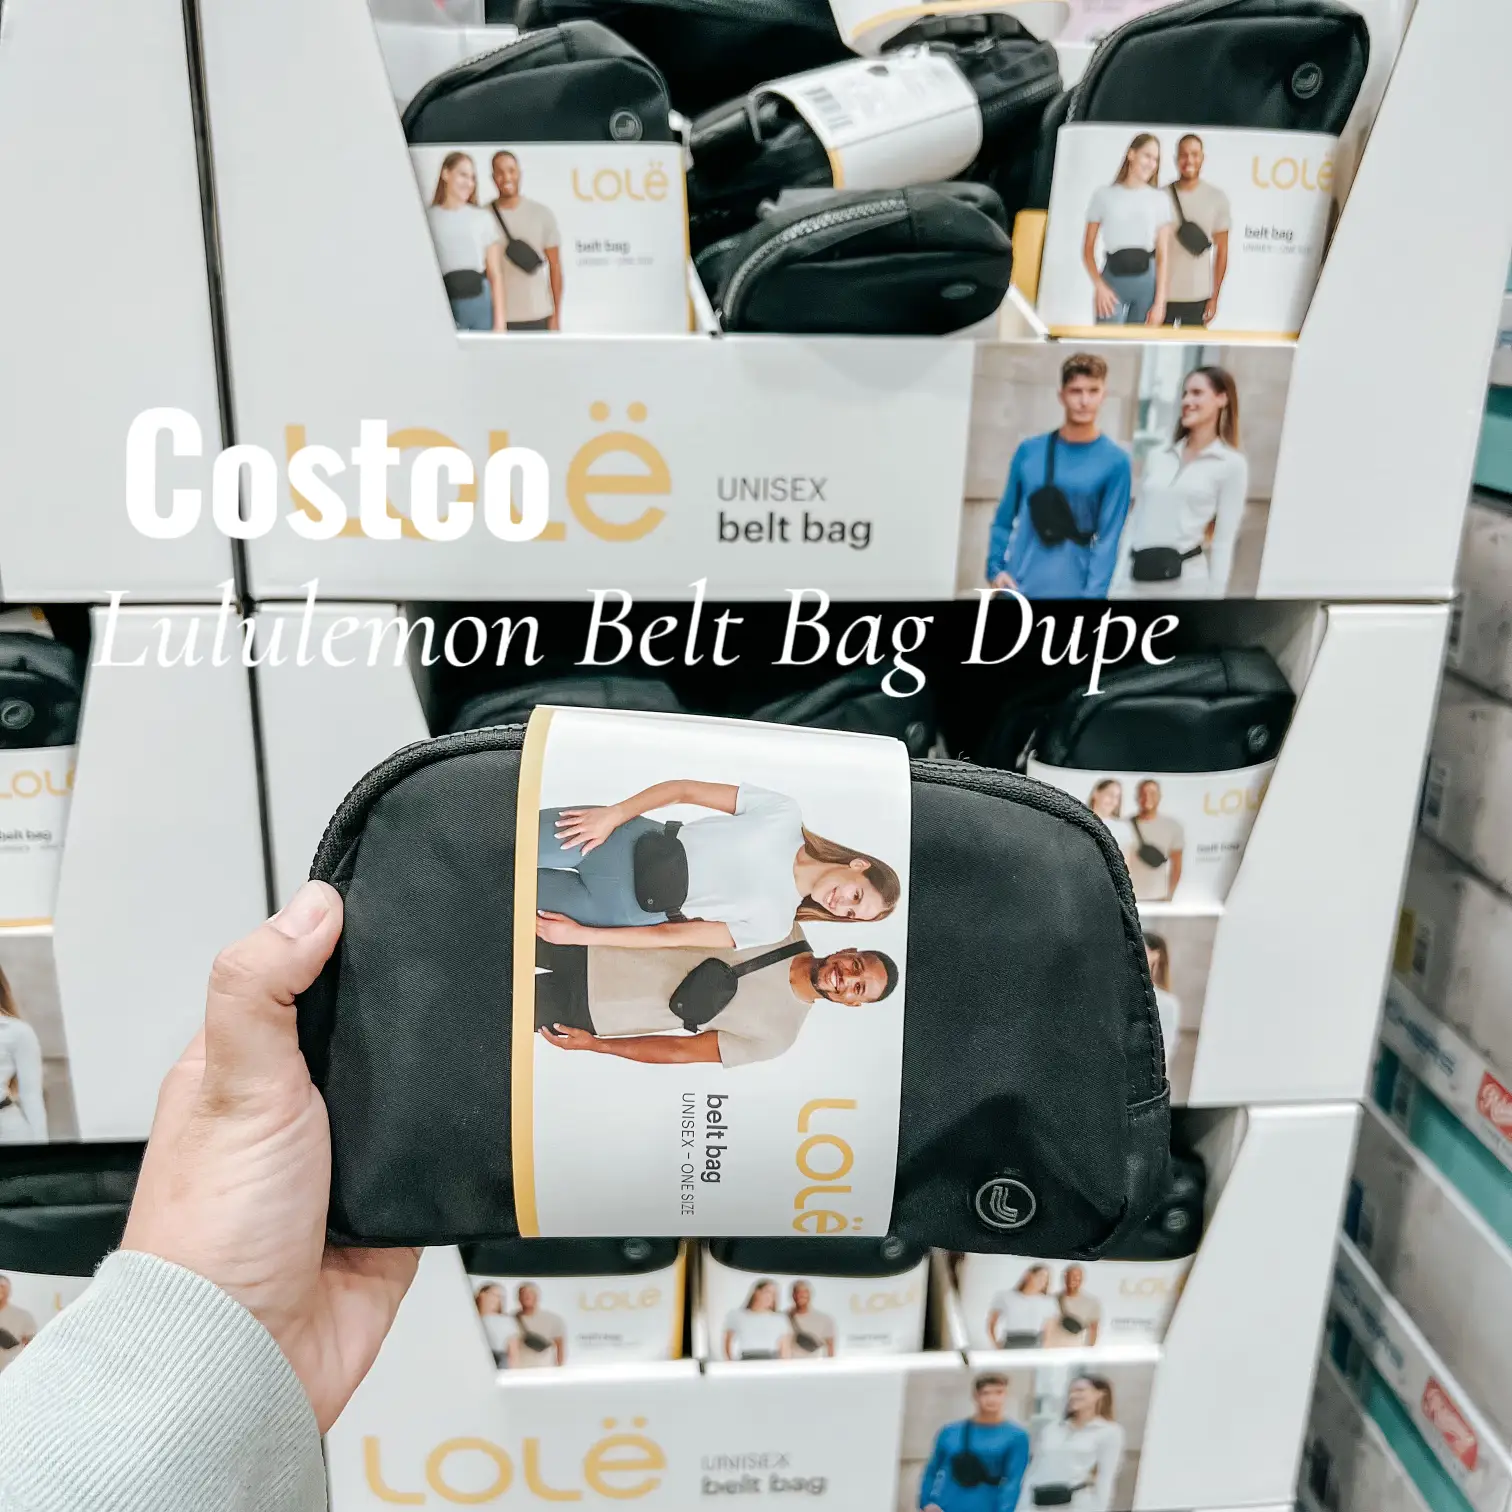 👜 Lululemon Belt Bag Dupes are at Costco! These Lole unisex bags